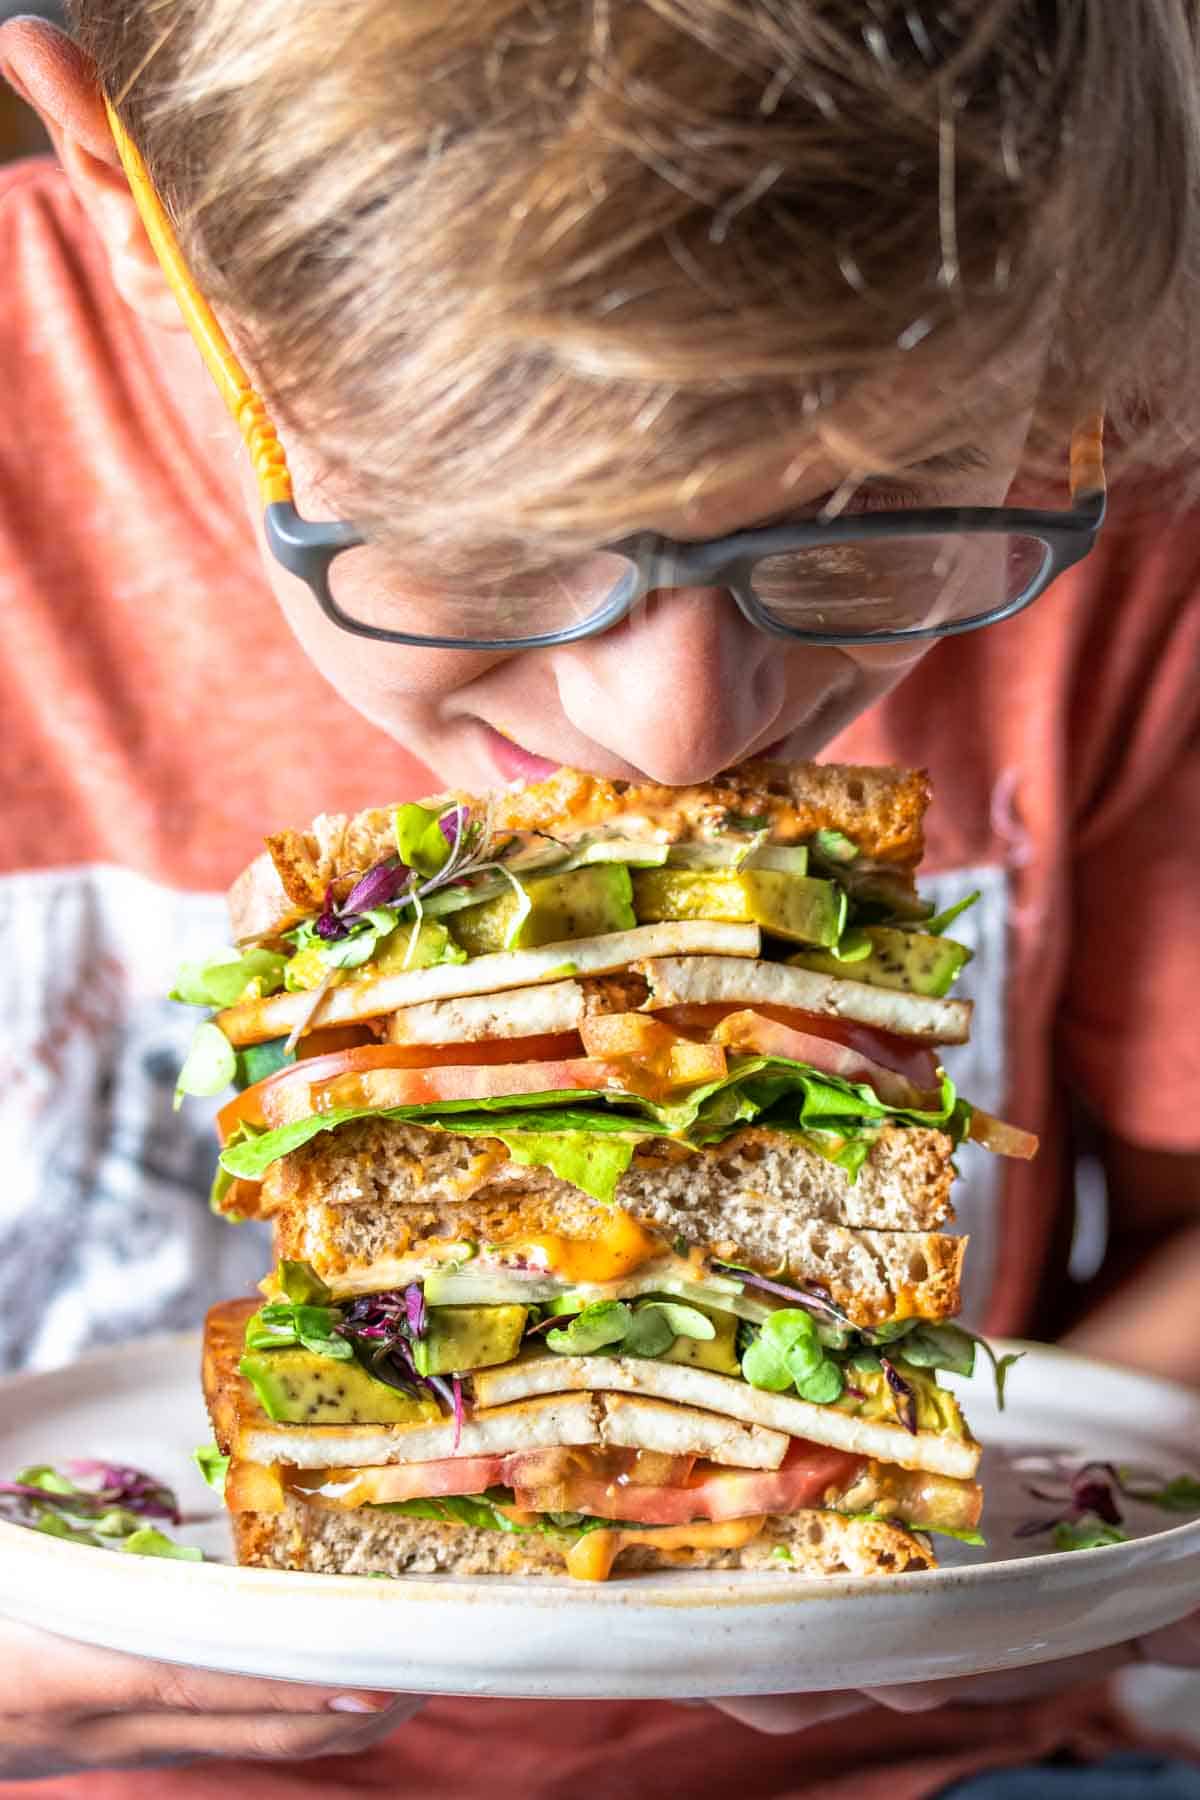 A boy with glasses and an orange shirt leaning down and taking a bit from the top of a stack of tofu and veggie sandwich halves.